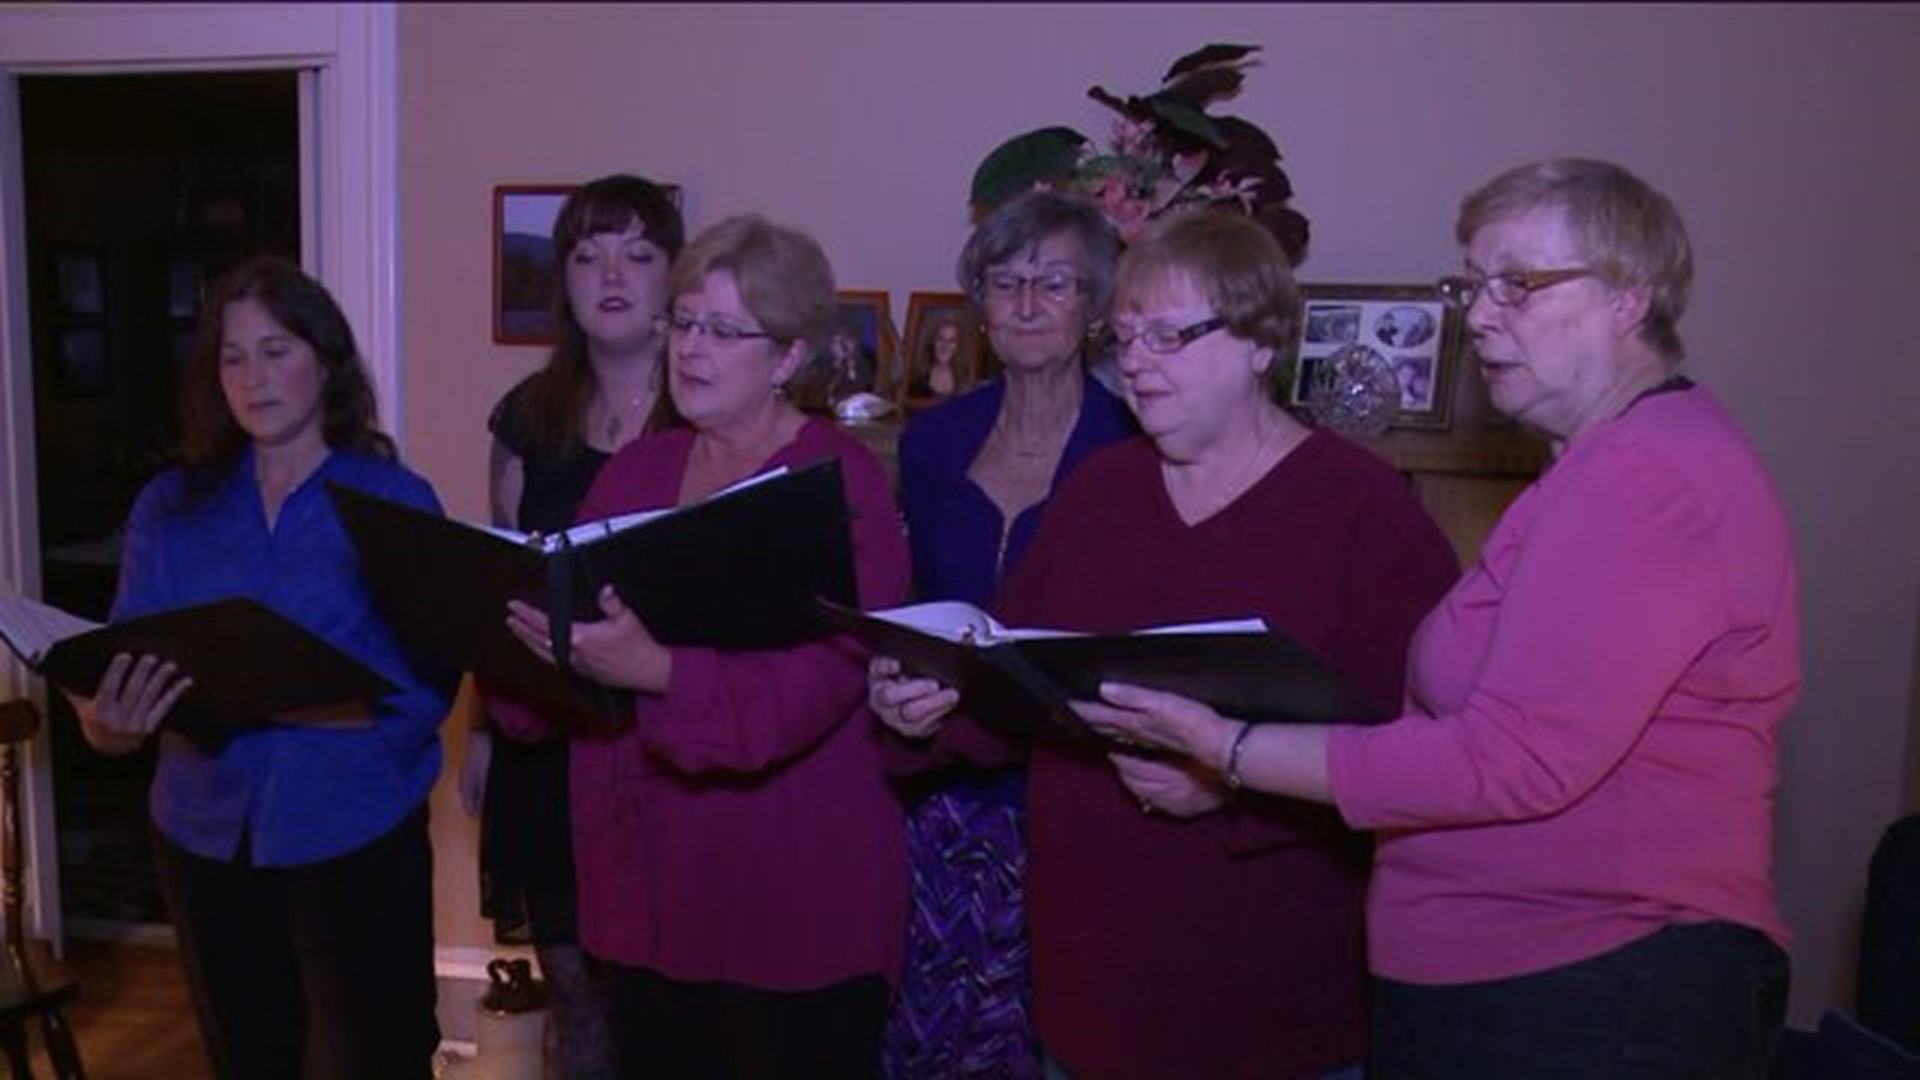 Choral group remembers friend lost in fatal car crash